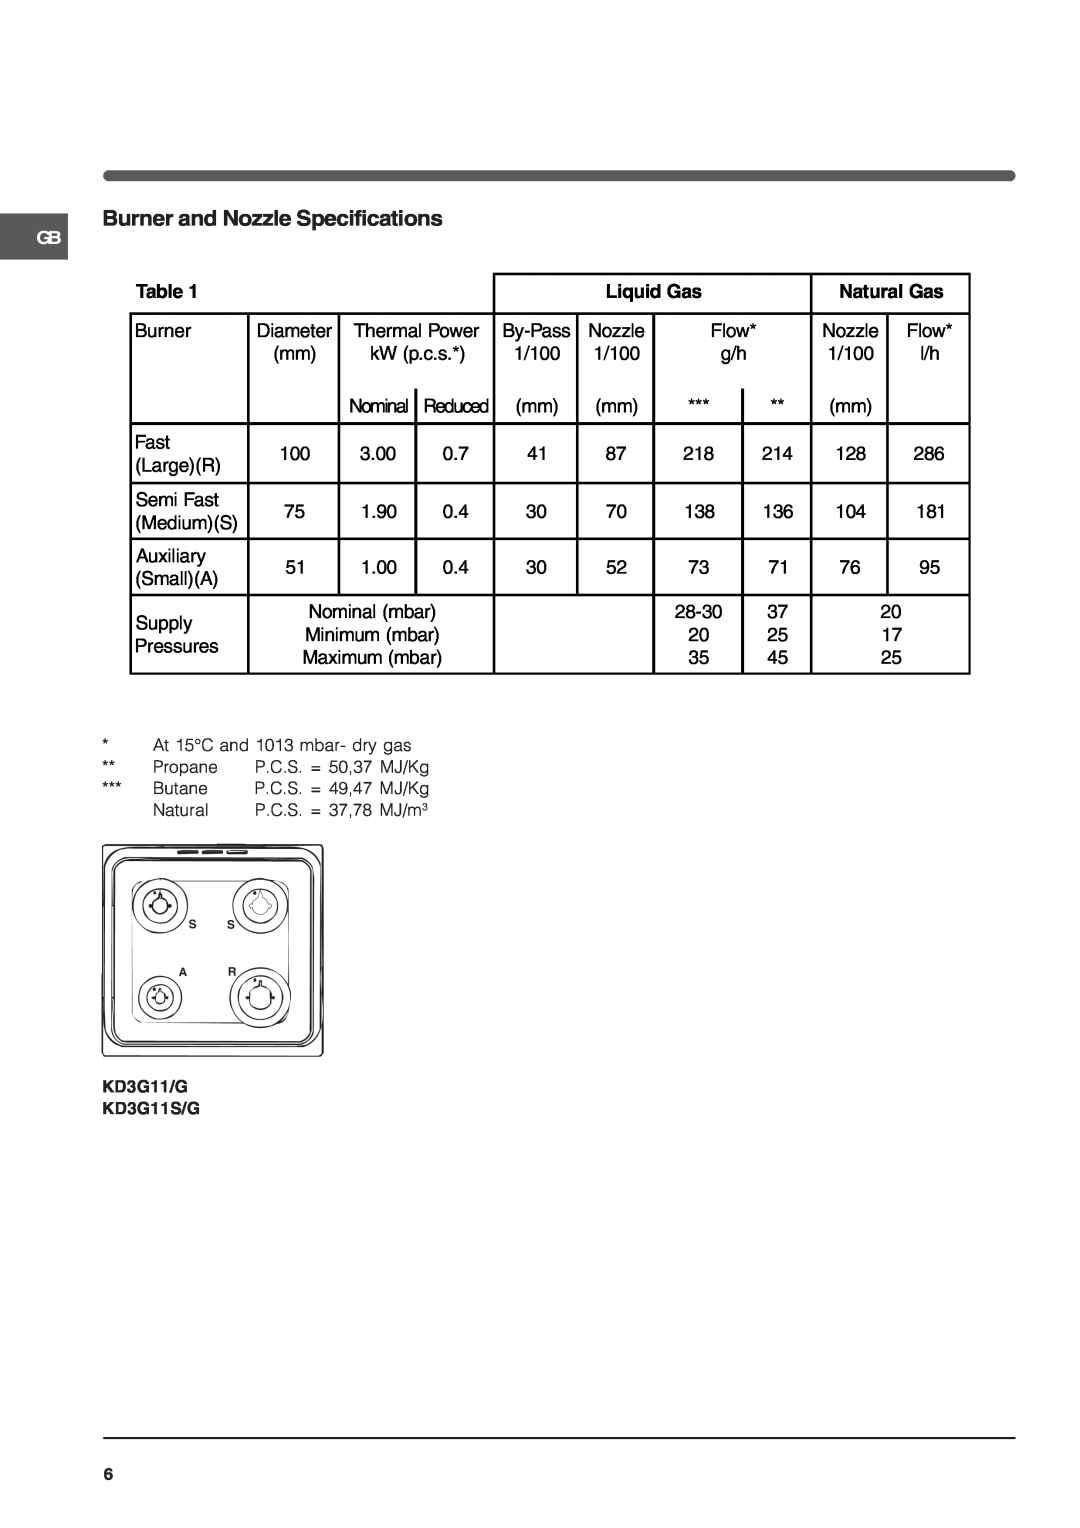 Indesit KD3G11S/G manual Burner and Nozzle Specifications, Liquid Gas 